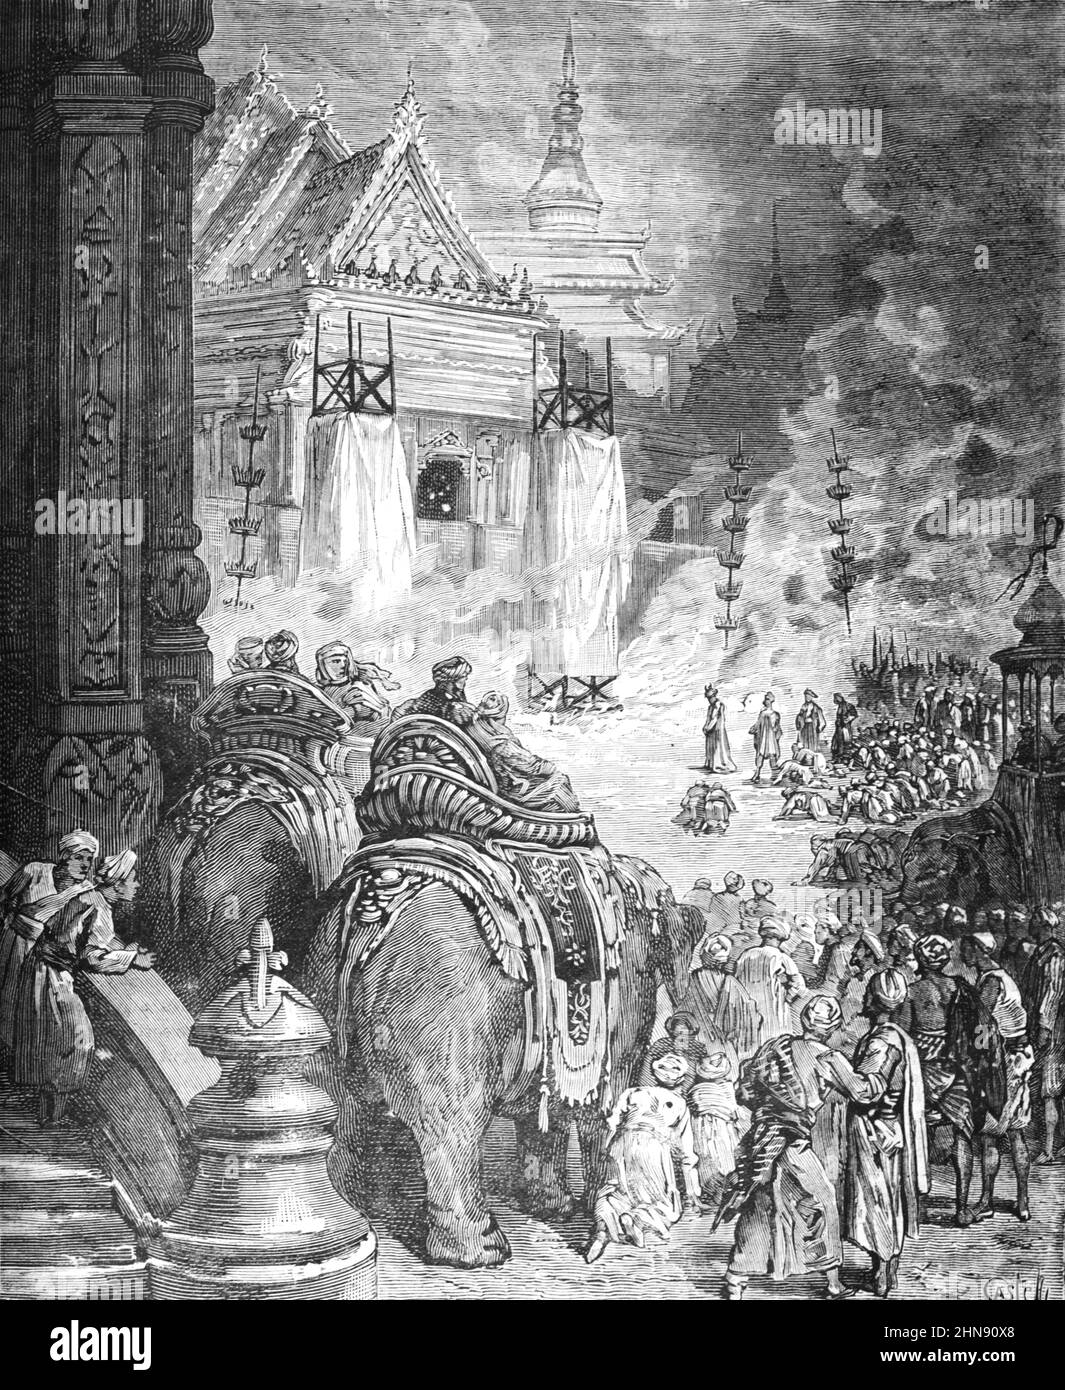 King Rama V of Thailand Lits a Funerary Pyre for a Royal Funeral or Burial in the Bangkok Palace Bangkok Thailand. Vintage Illustration or Engraving 1883 (Castelli) Stock Photo